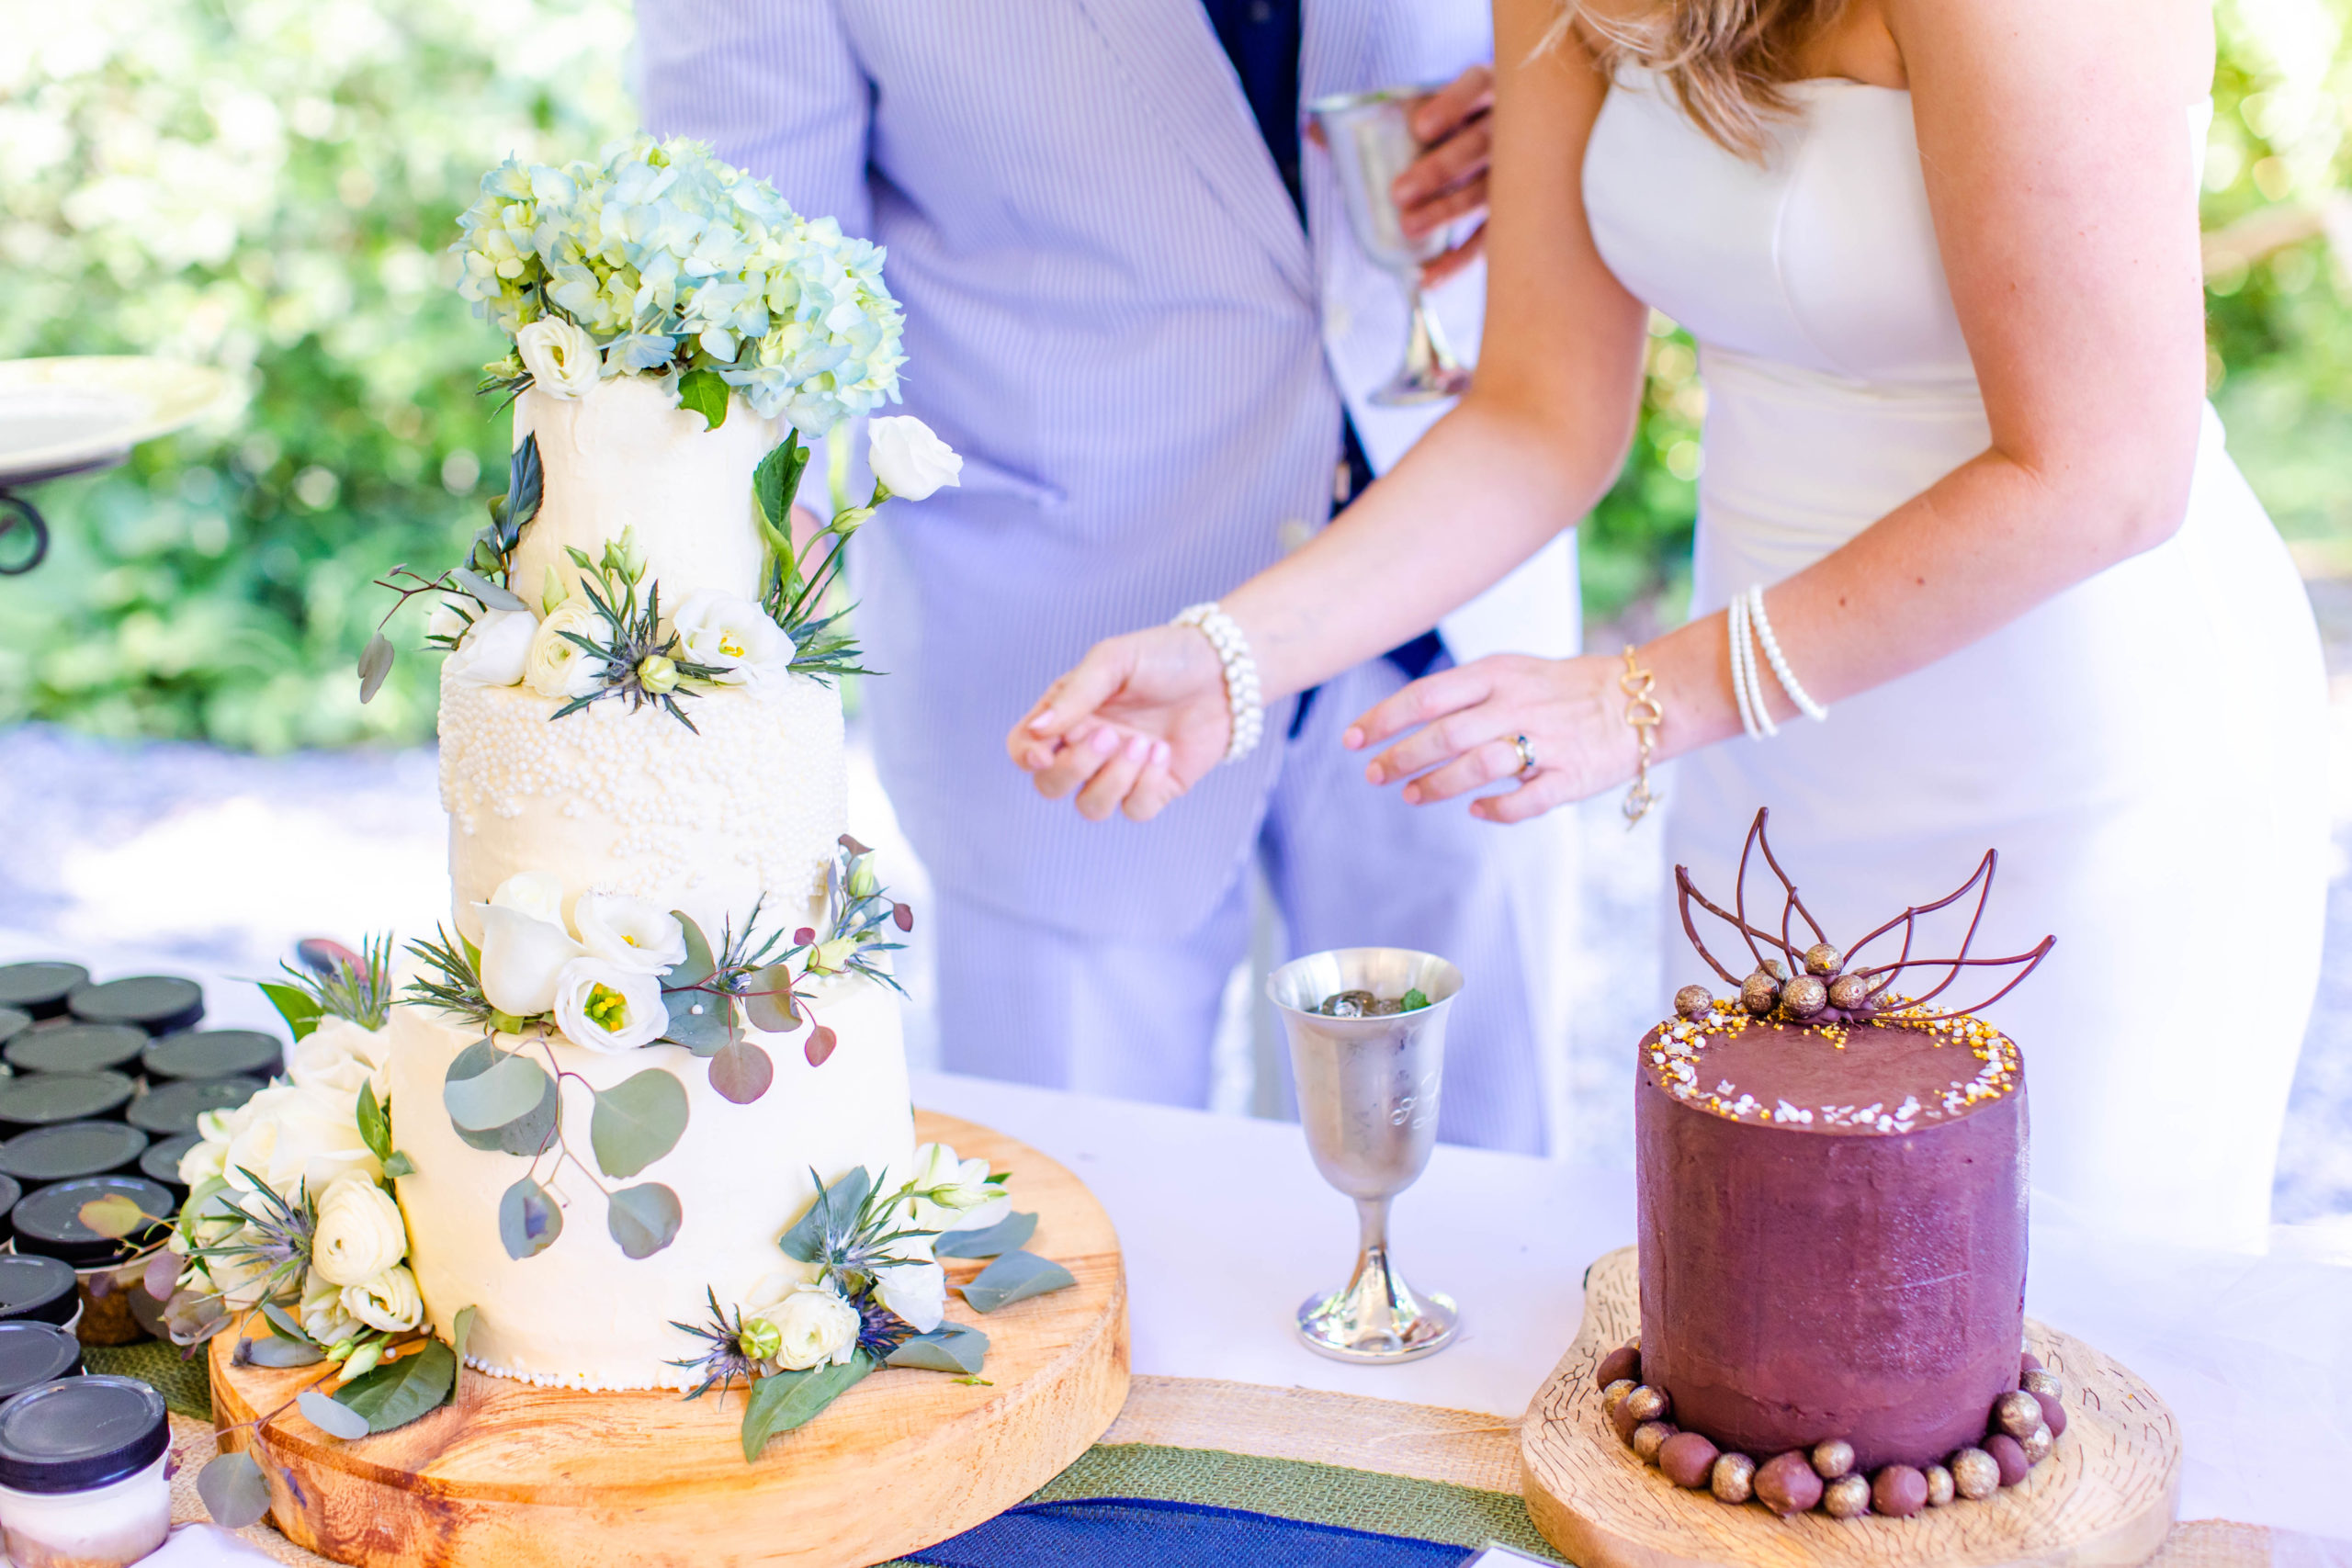 couple cuts the cake at their wedding outside under a tent.